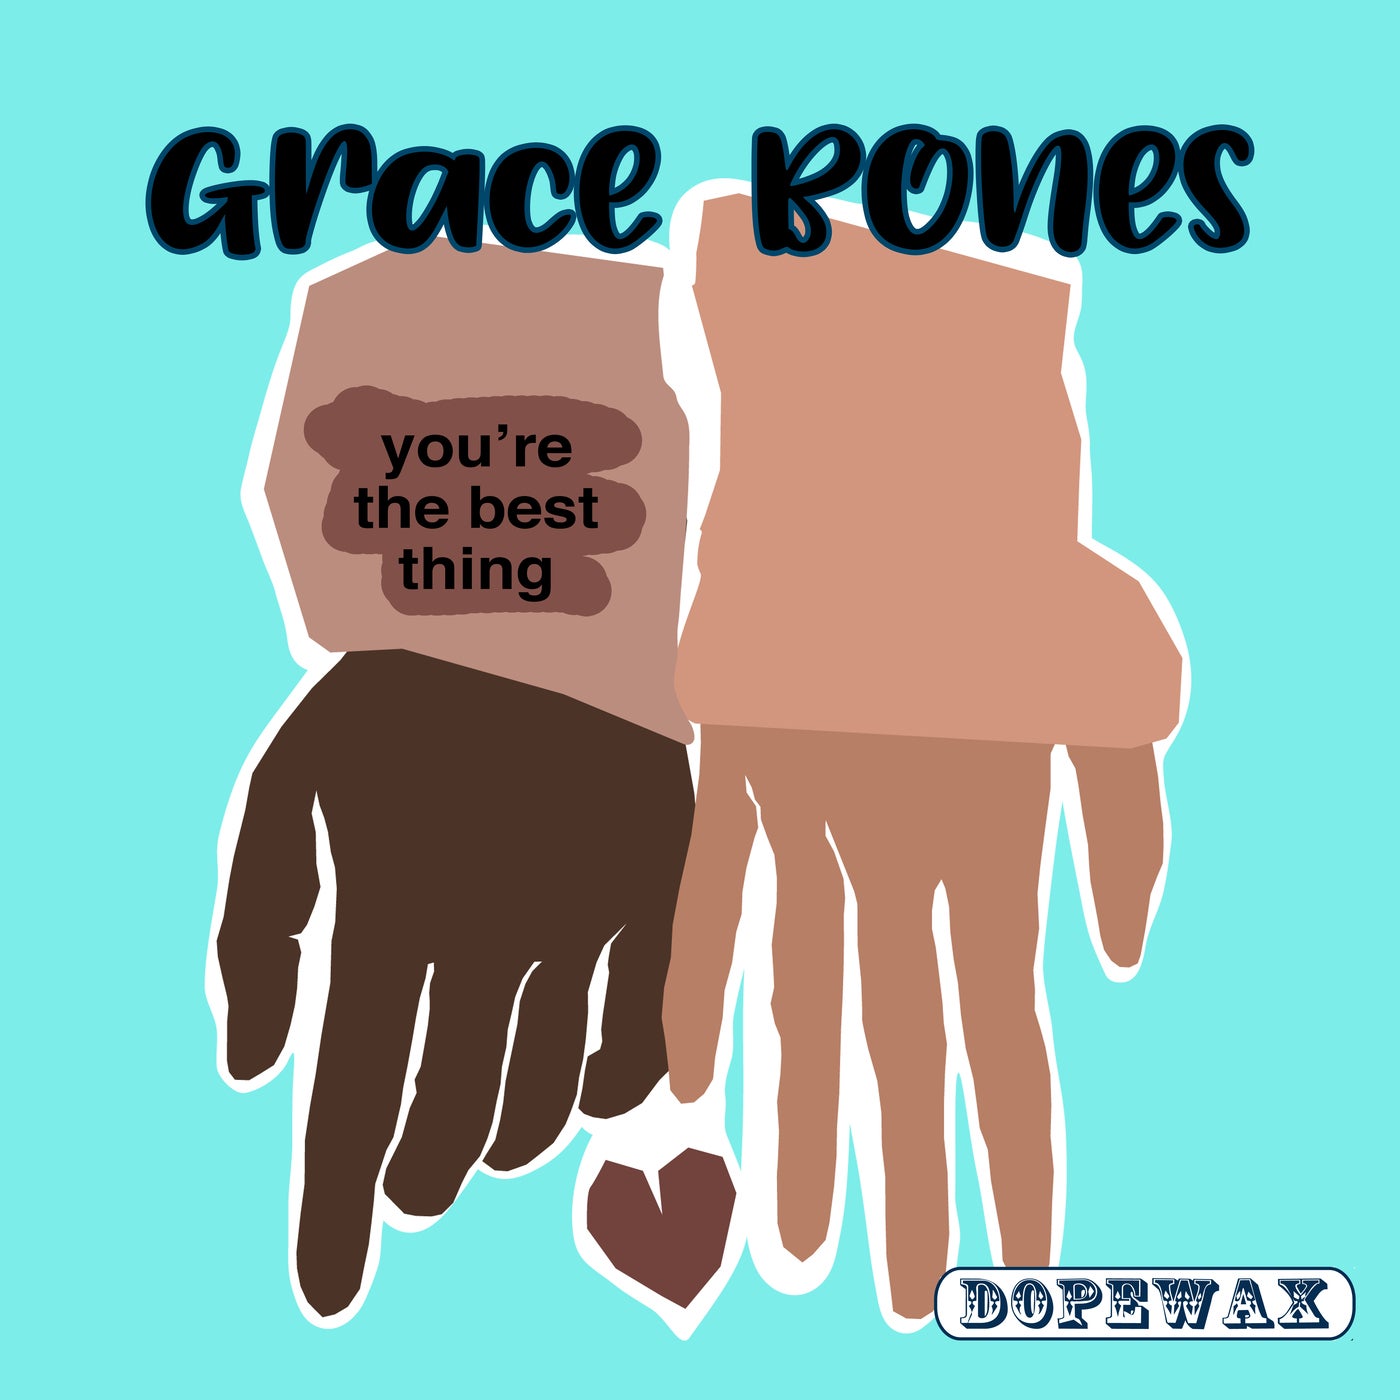 Download Grace Bones - You're The Best Thing on Electrobuzz